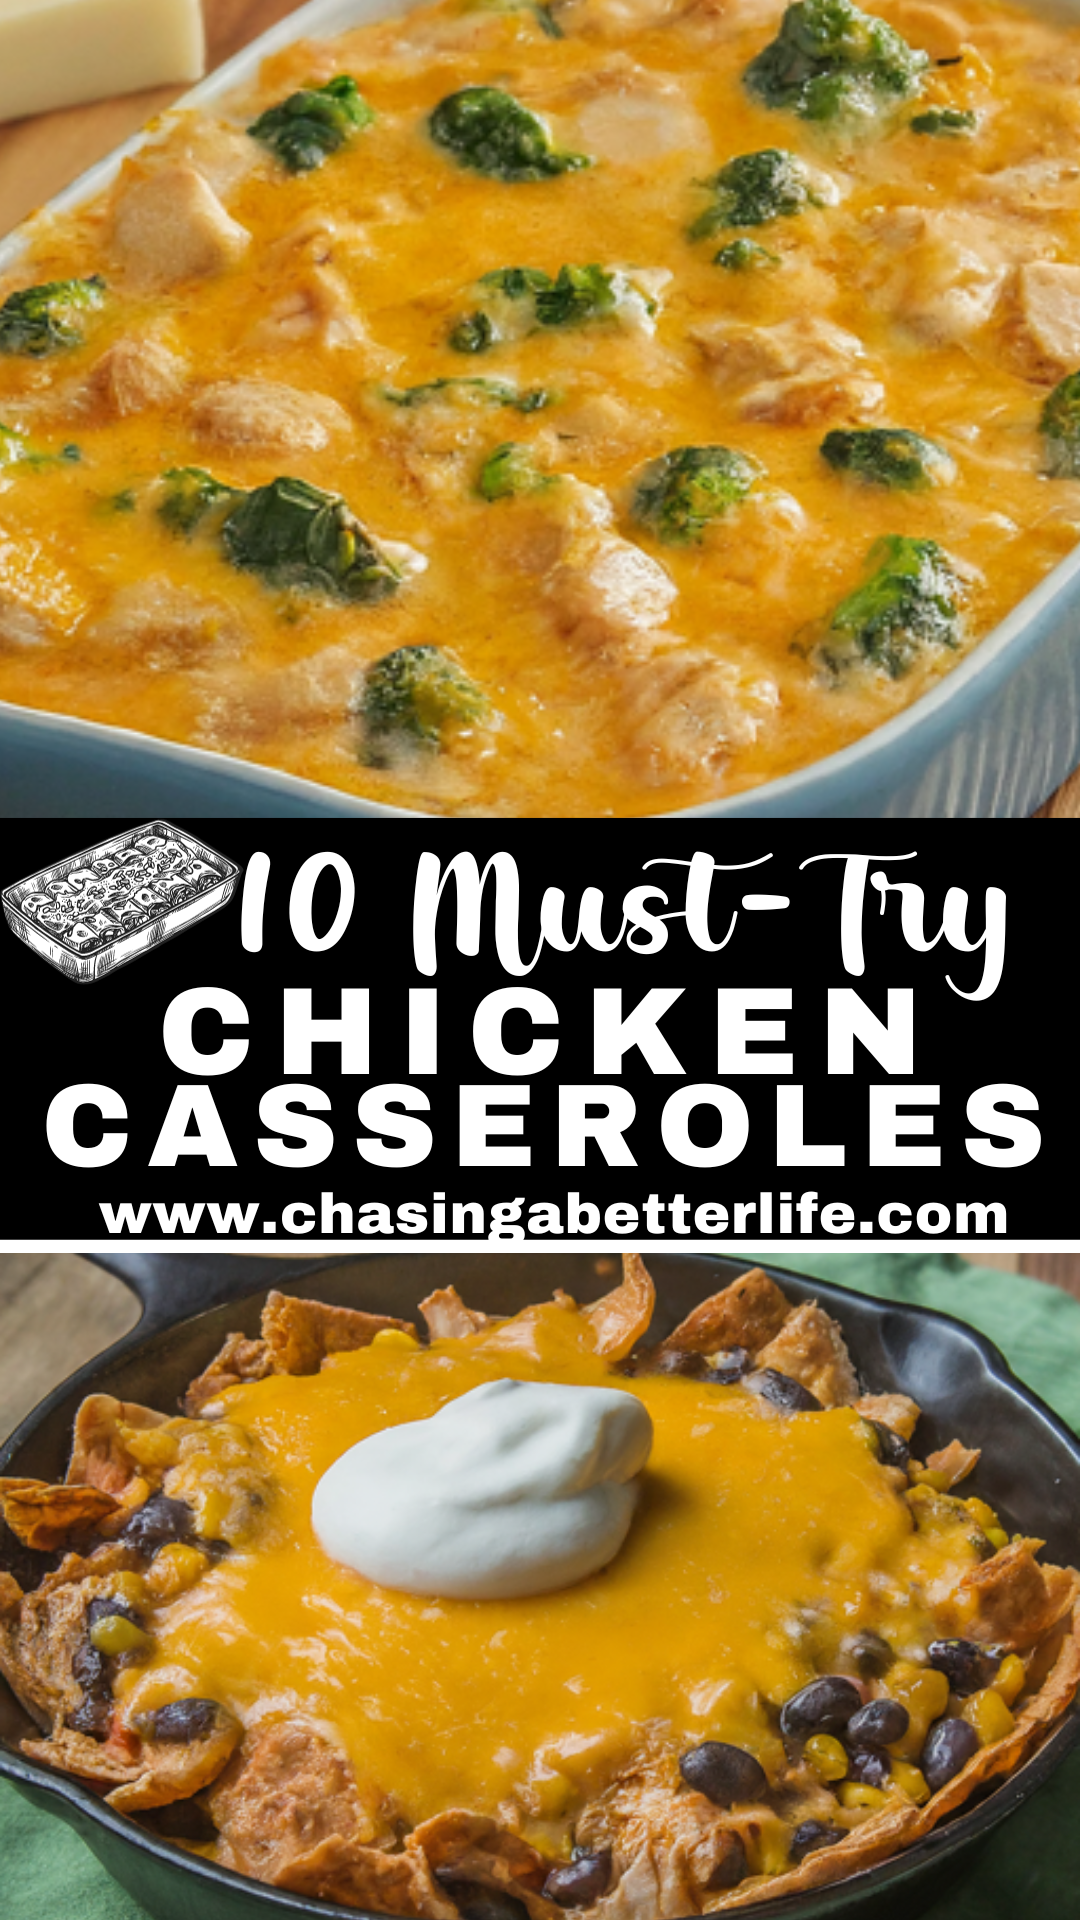 10 Irresistible Chicken Casseroles You Need to Try Right Now! 10